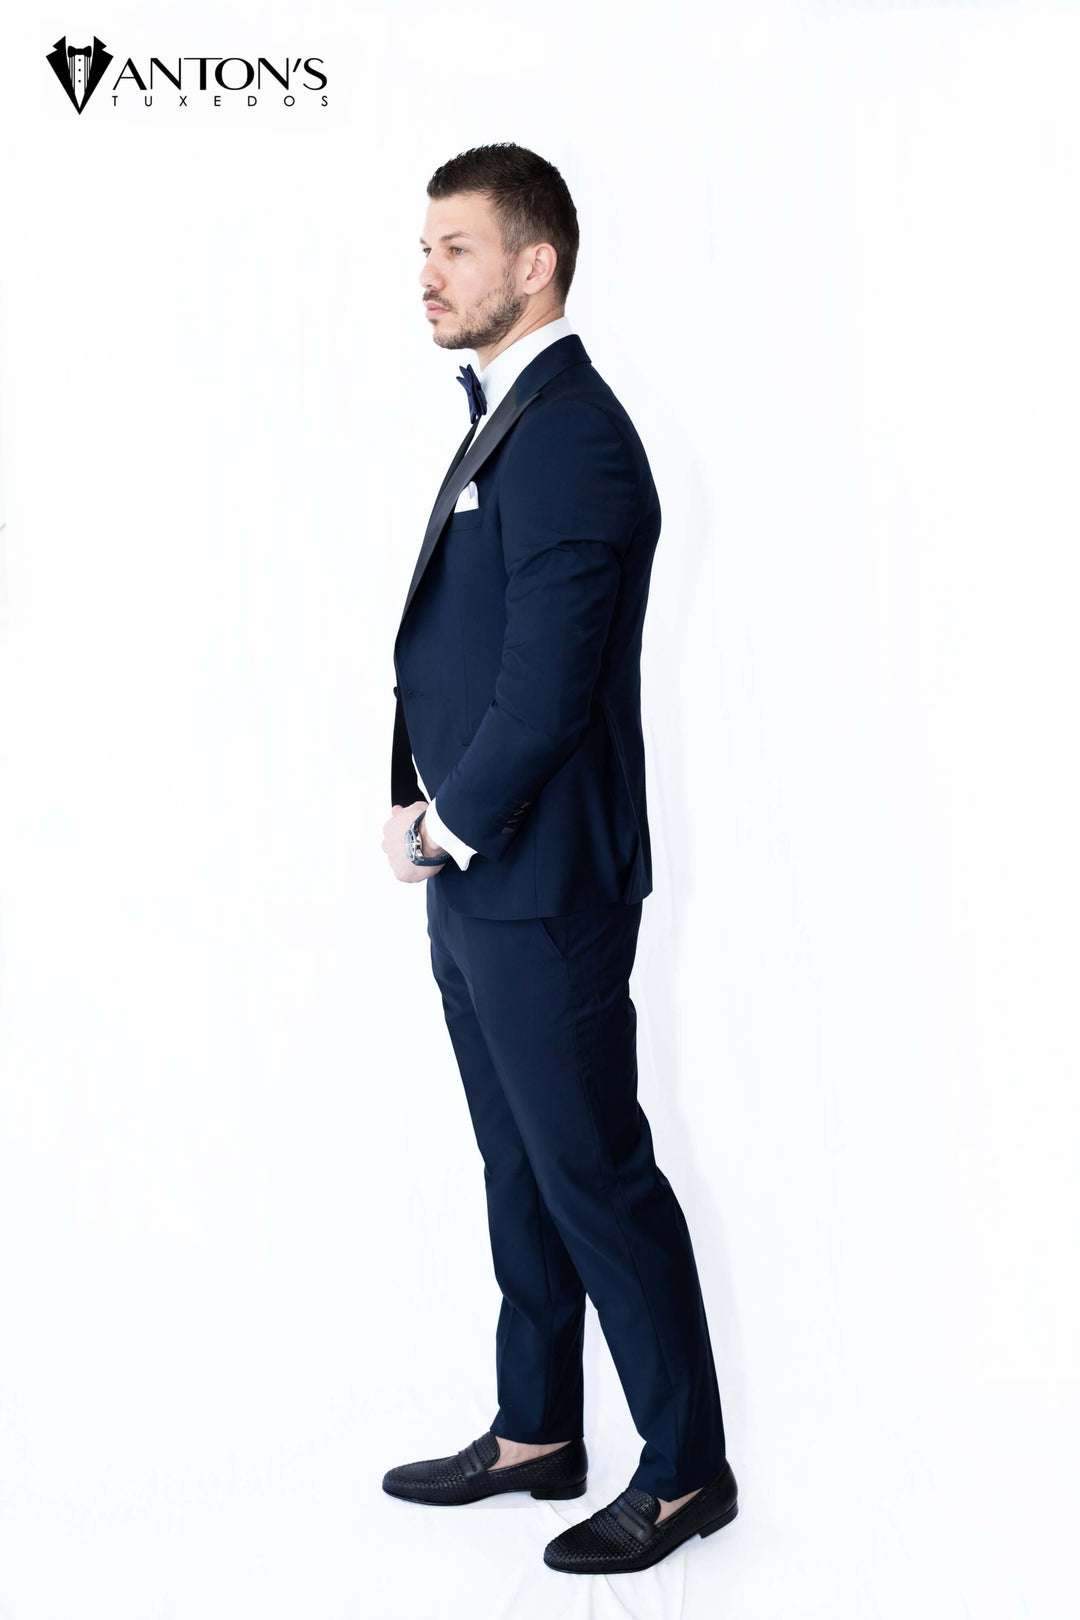 Groom in navy blue tuxedo with black peak lapel, perfect for formal menswear, wedding tuxedos, and classic high-quality groom attire